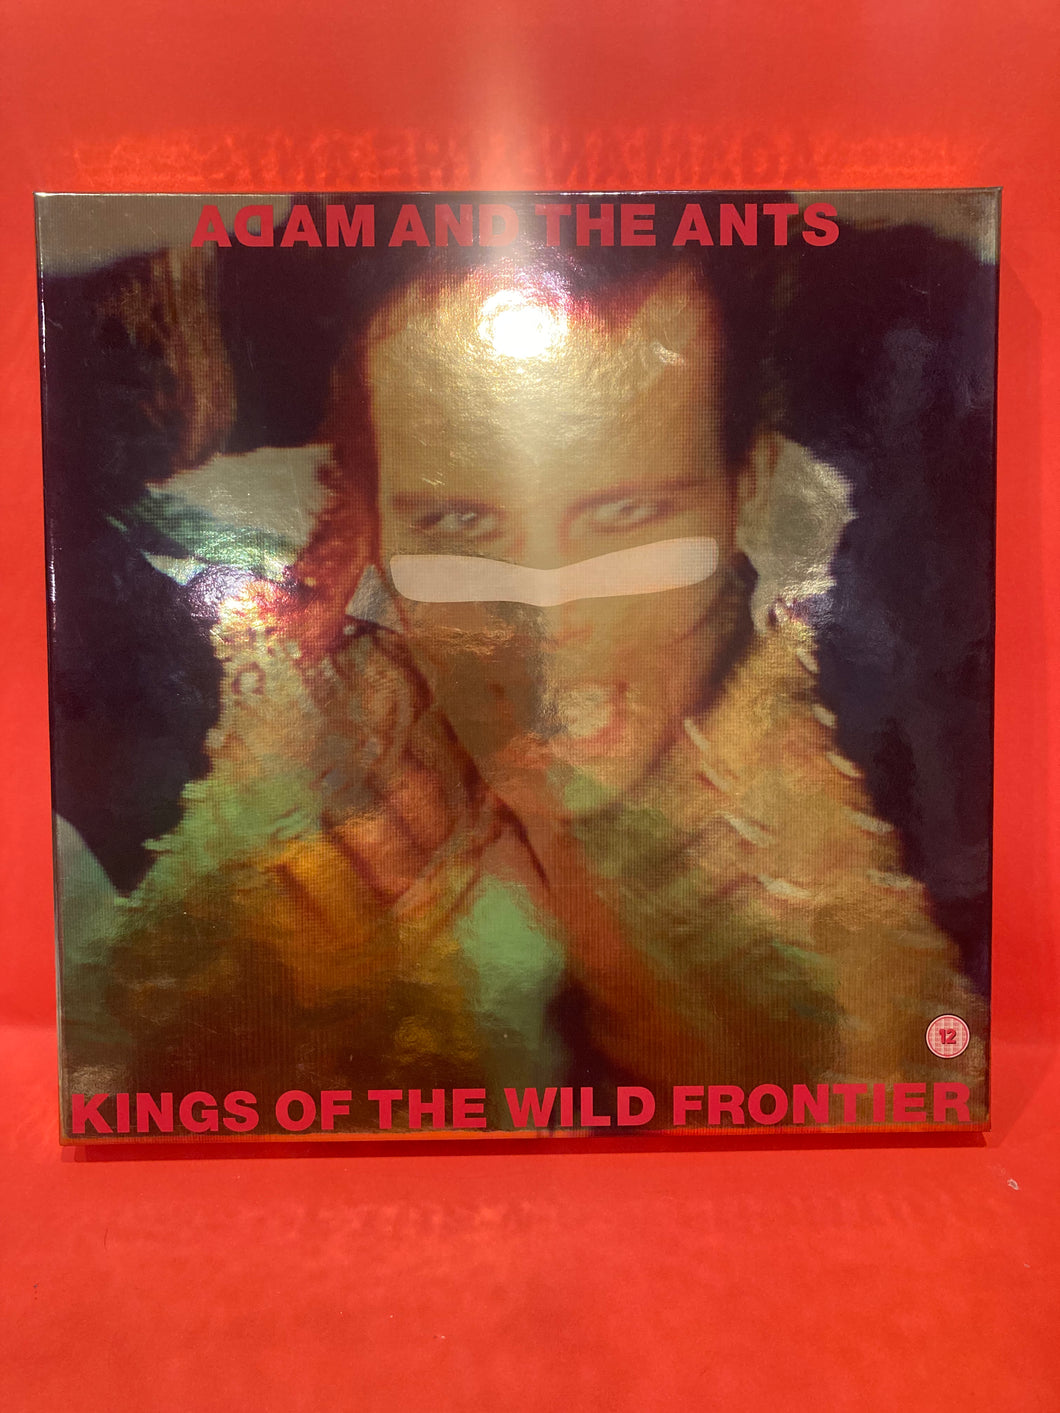 ADAM AND THE ANTS - KINGS OF THE WILD FRONTIER - DELUXE GOLD VINYL + CD BOX SET